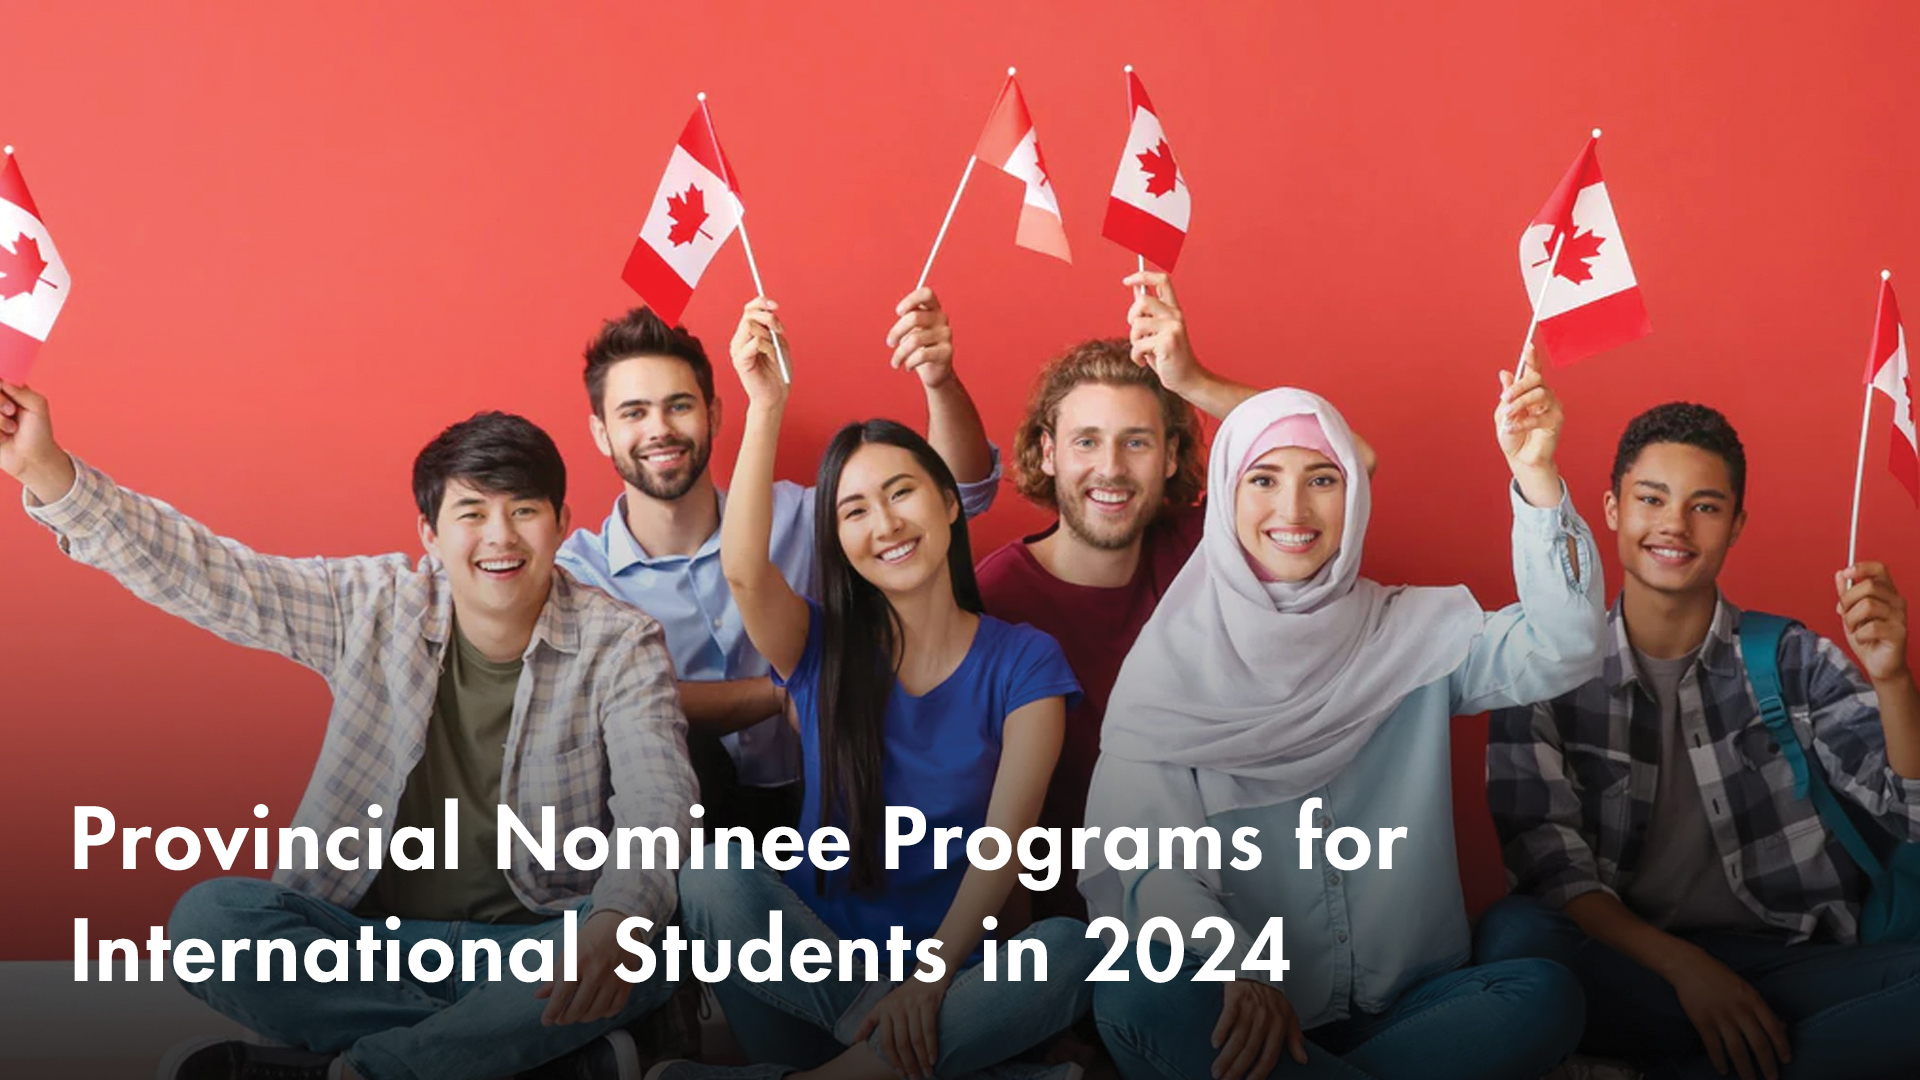  Provincial Nominee Programs For International Students In 2024: